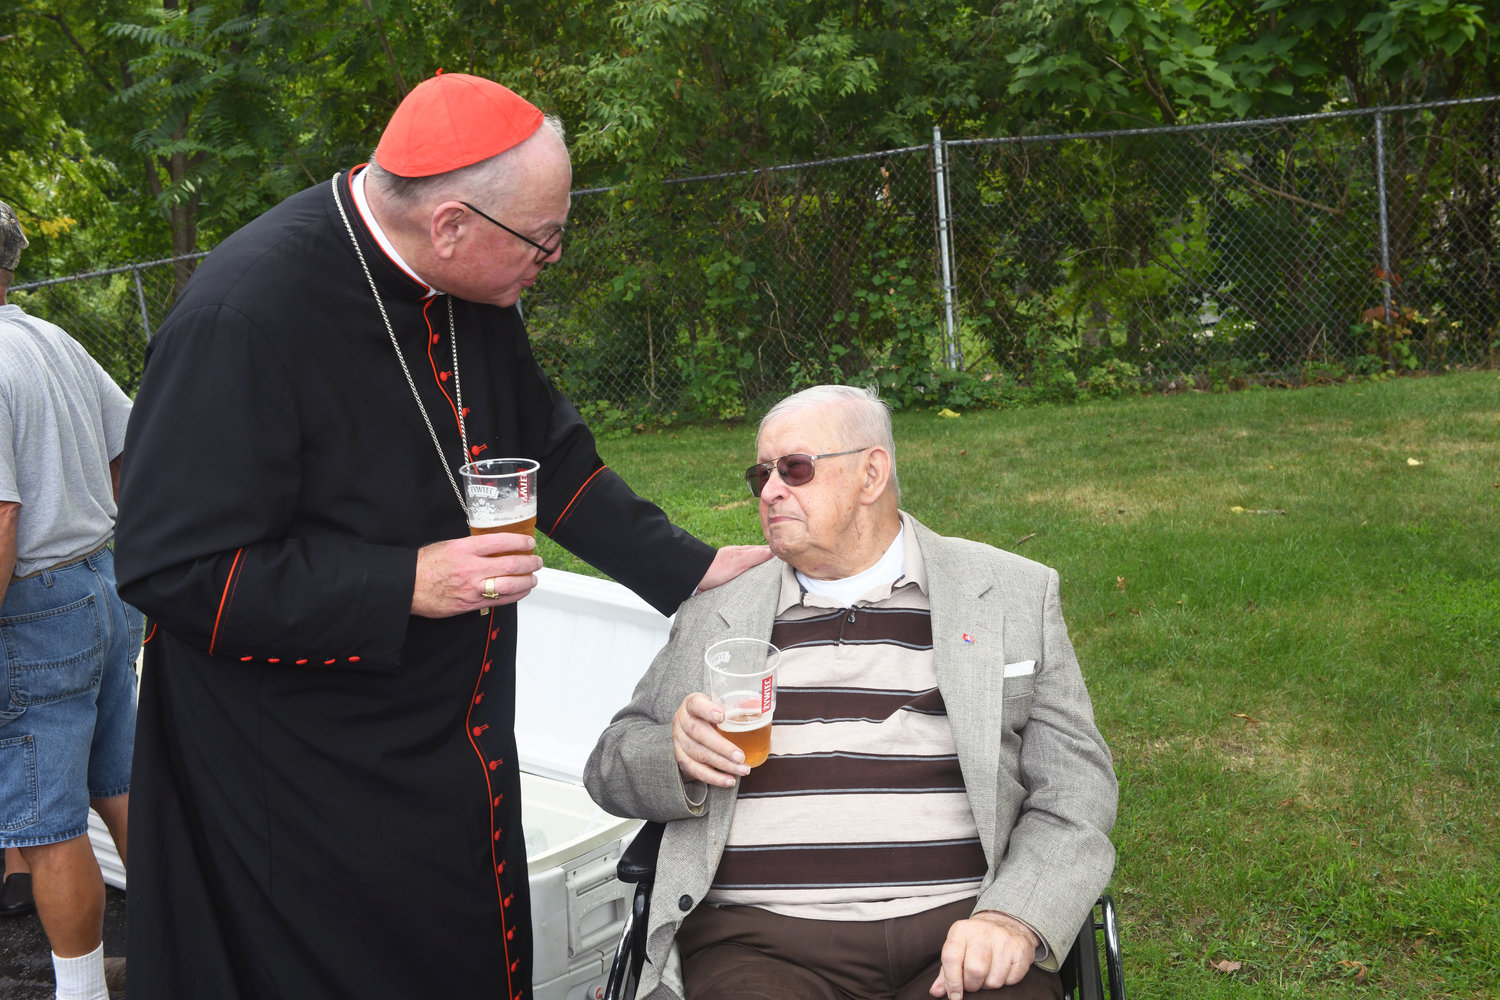 Cardinal Dolan talks to 101-year-old Paul Berish at a reception following the Mass at Immaculate Conception Church in Kingston.